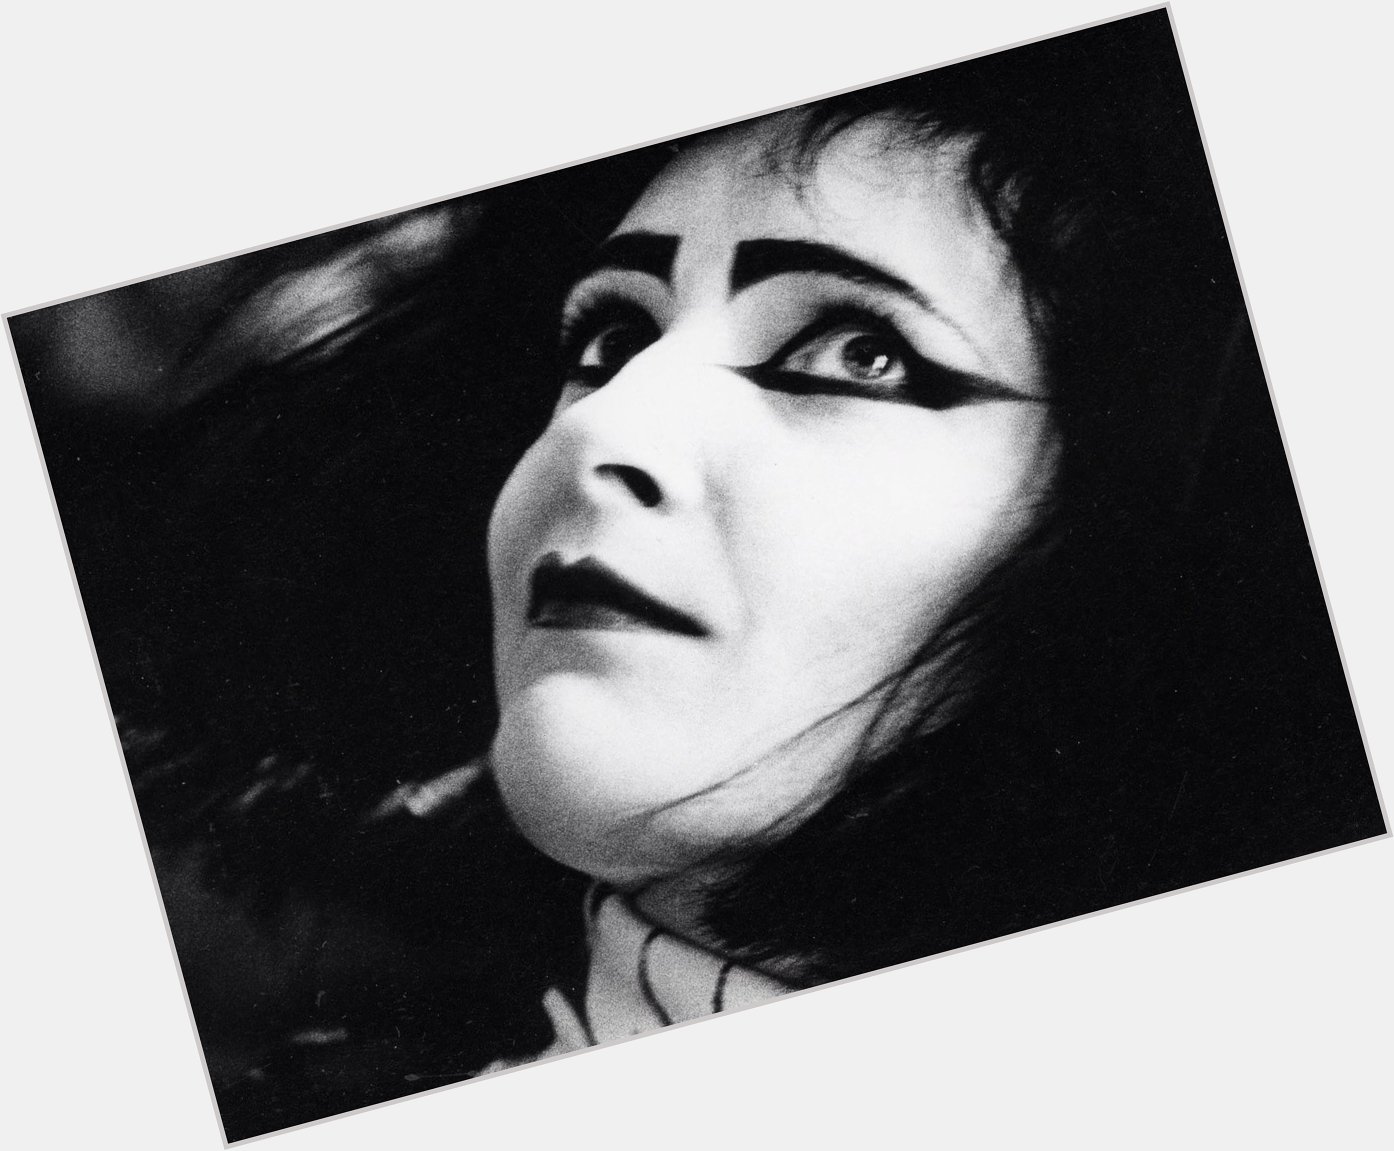 May 27th, happy birthday to punk icon siouxsie sioux, she\s such an inspiring person and character 